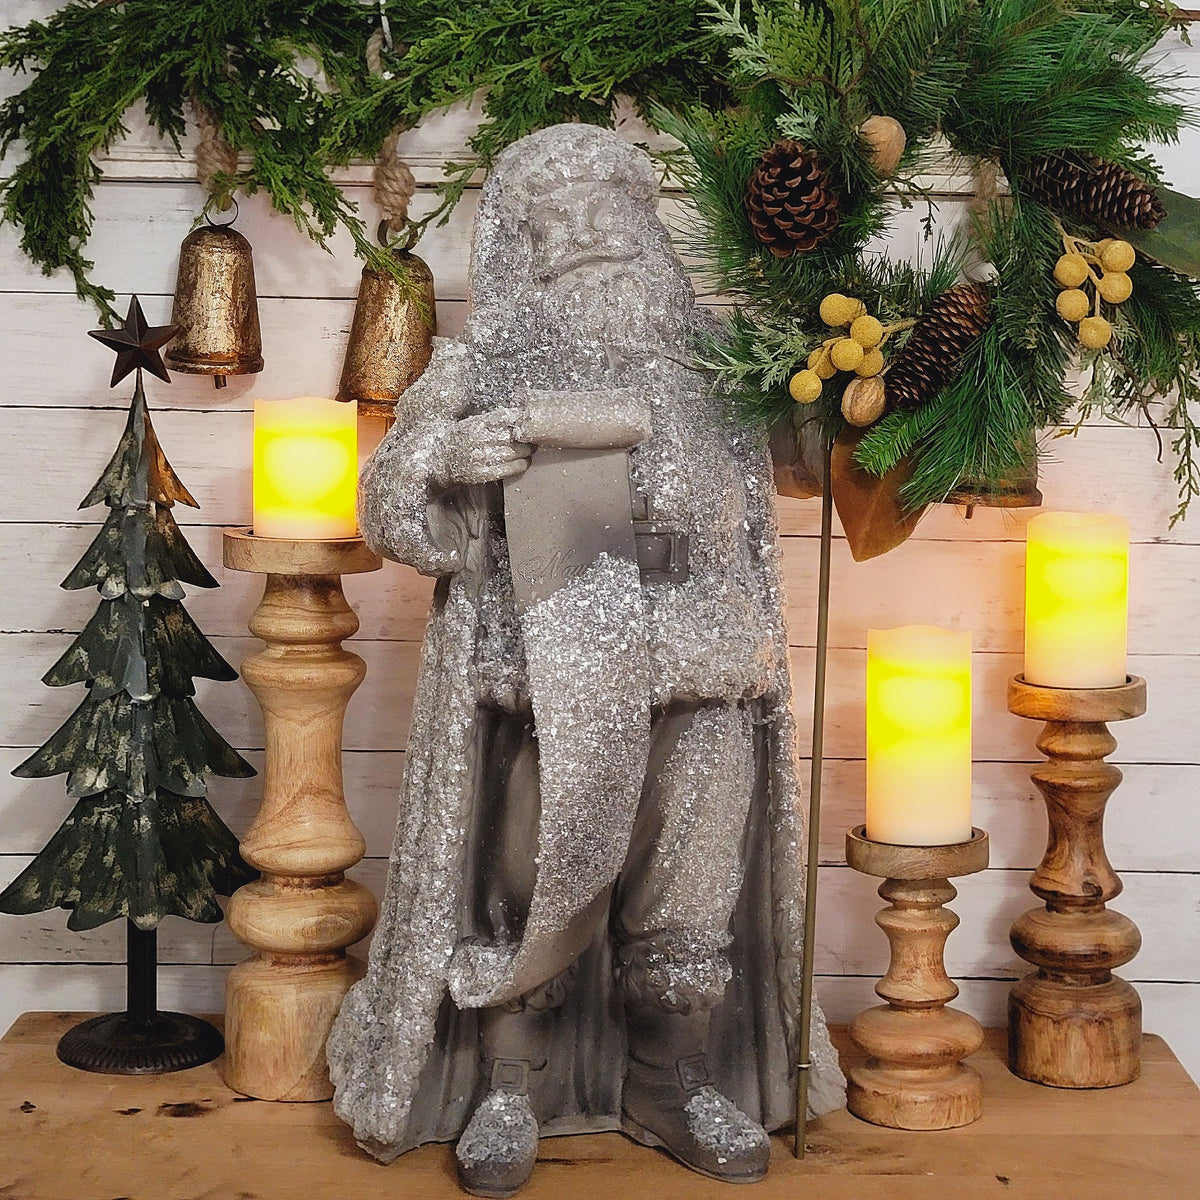 Glitter frosted Santa statue holding a woodland wreath.